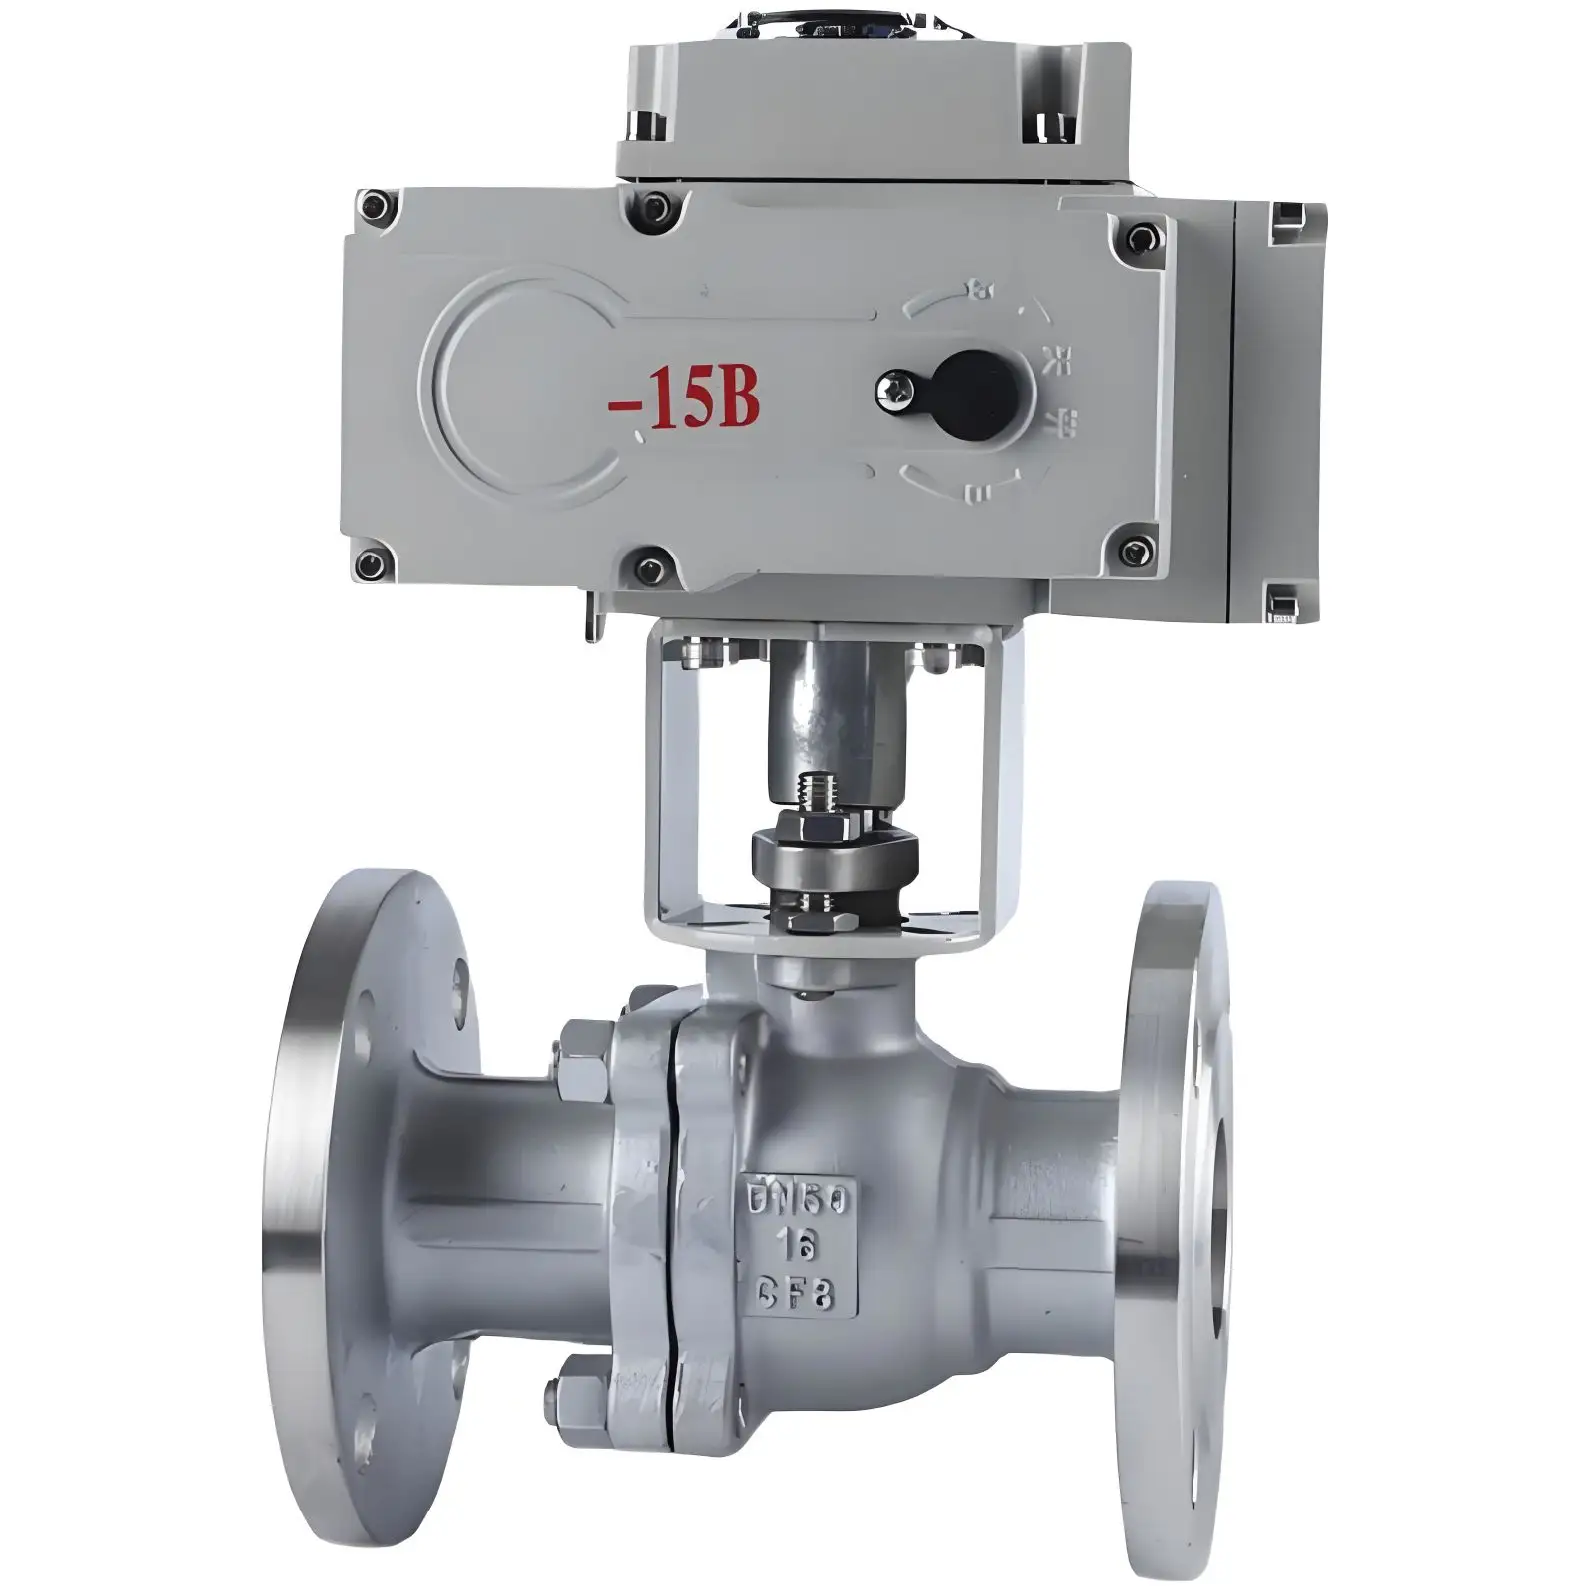 2-Way 300 900 Sanitary Smart Pneumatic Gate Valve In Stainless Steel Of Hard Soft Seal Dn50 Dn100 Dn200 Dn500 Pn16 Electric